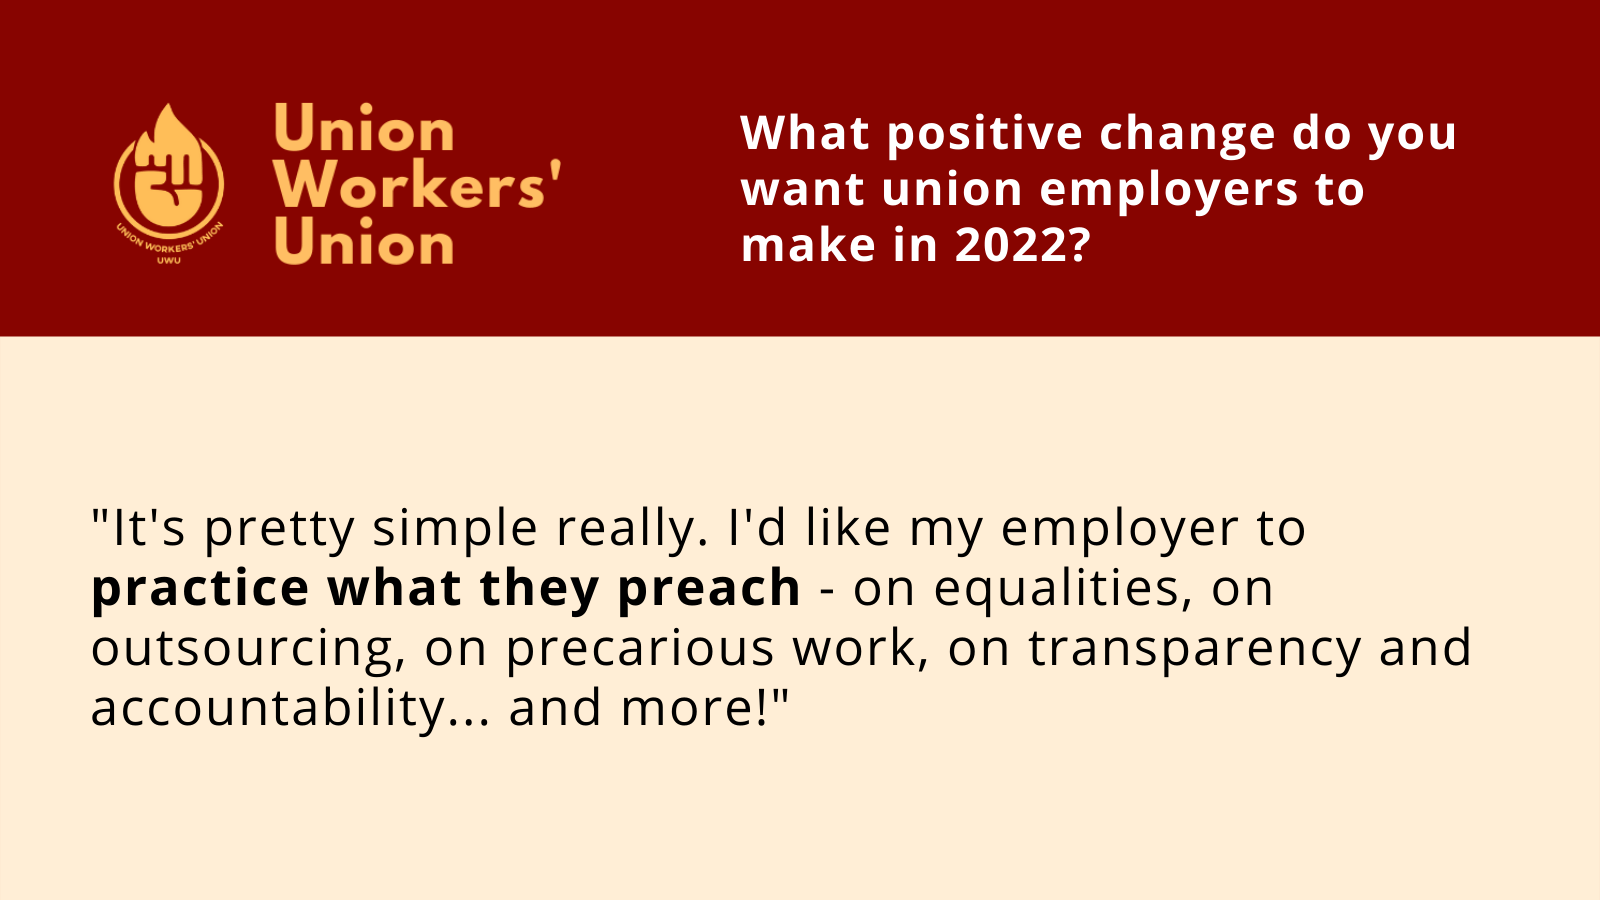 Union Workers' Union logo with a member question: What positive change do you want union employers to make in 2022? Response: "It's pretty simple really. I'd like my employer to practice what they preach - on equalities, on outsourcing, on precarious work, on transparency and accountability... and more!"